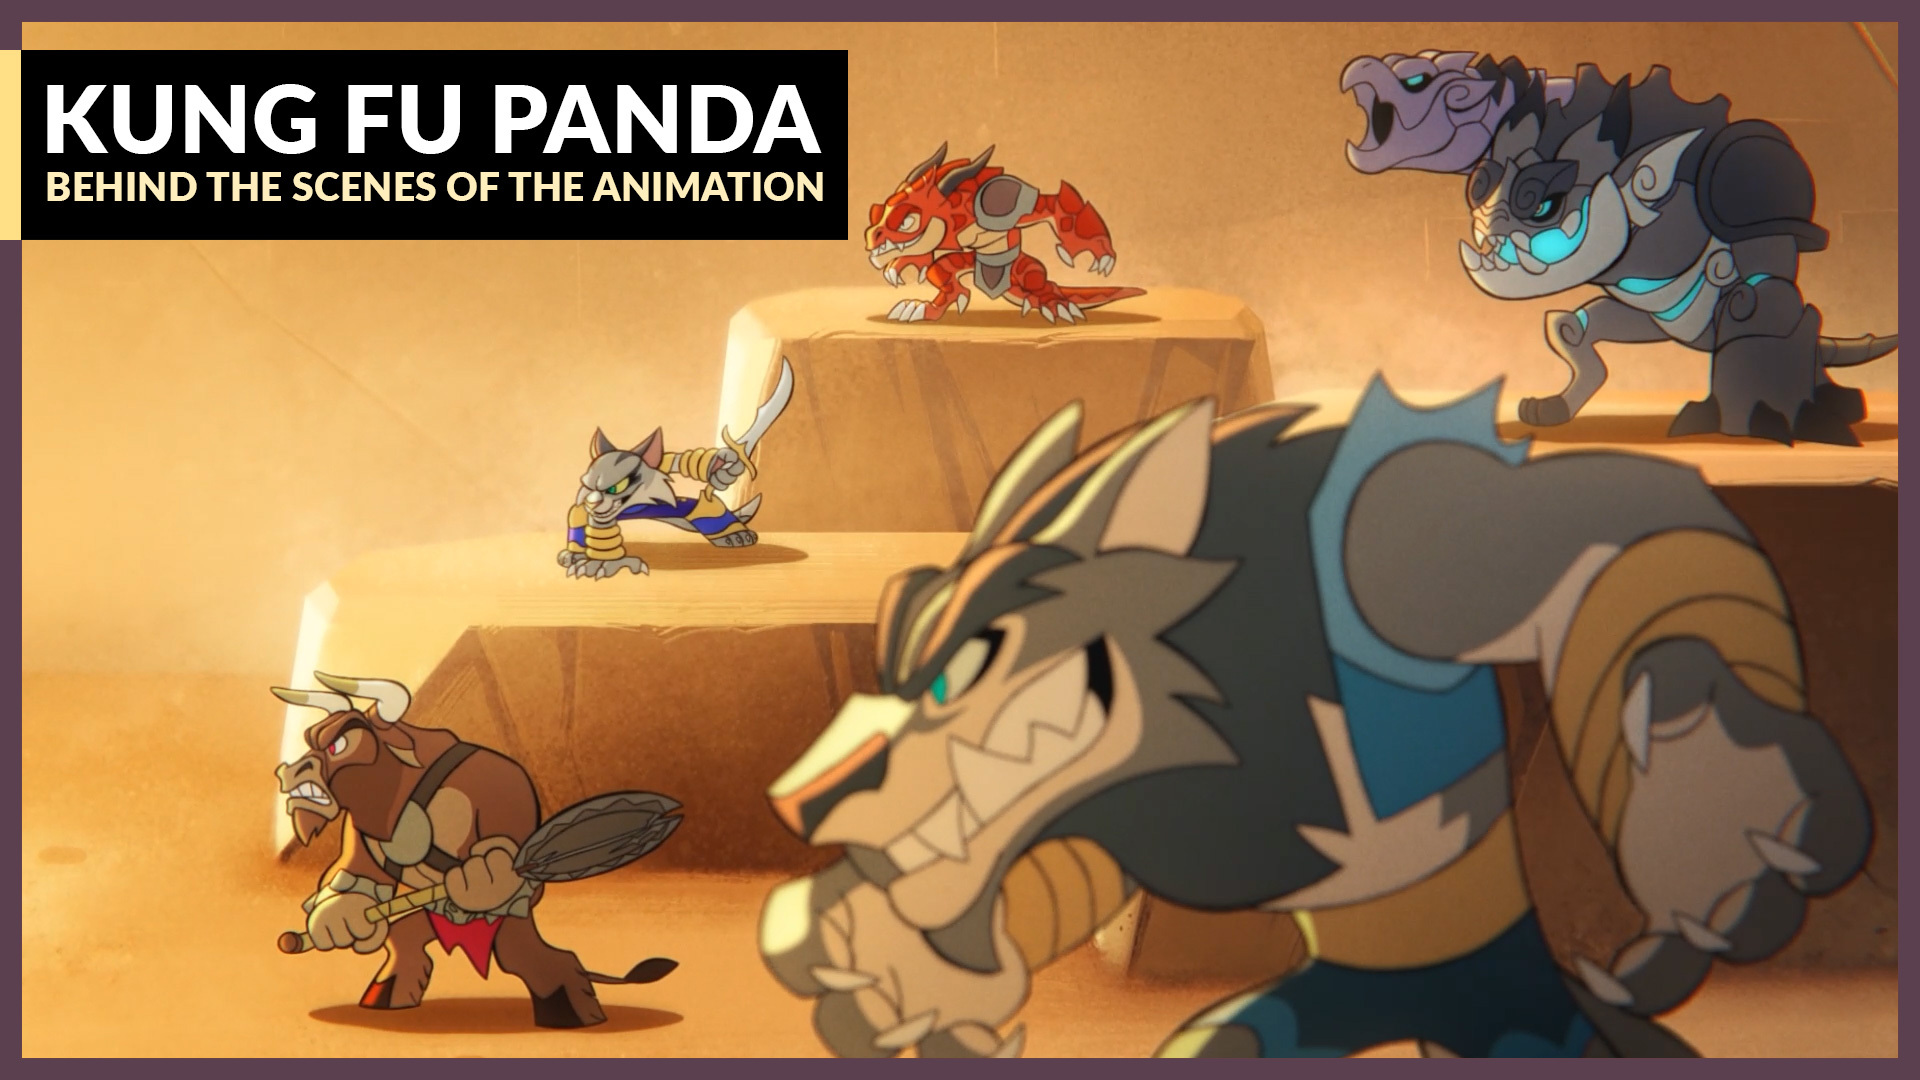 Behind the scenes of the animated Kung Fu Panda trailer